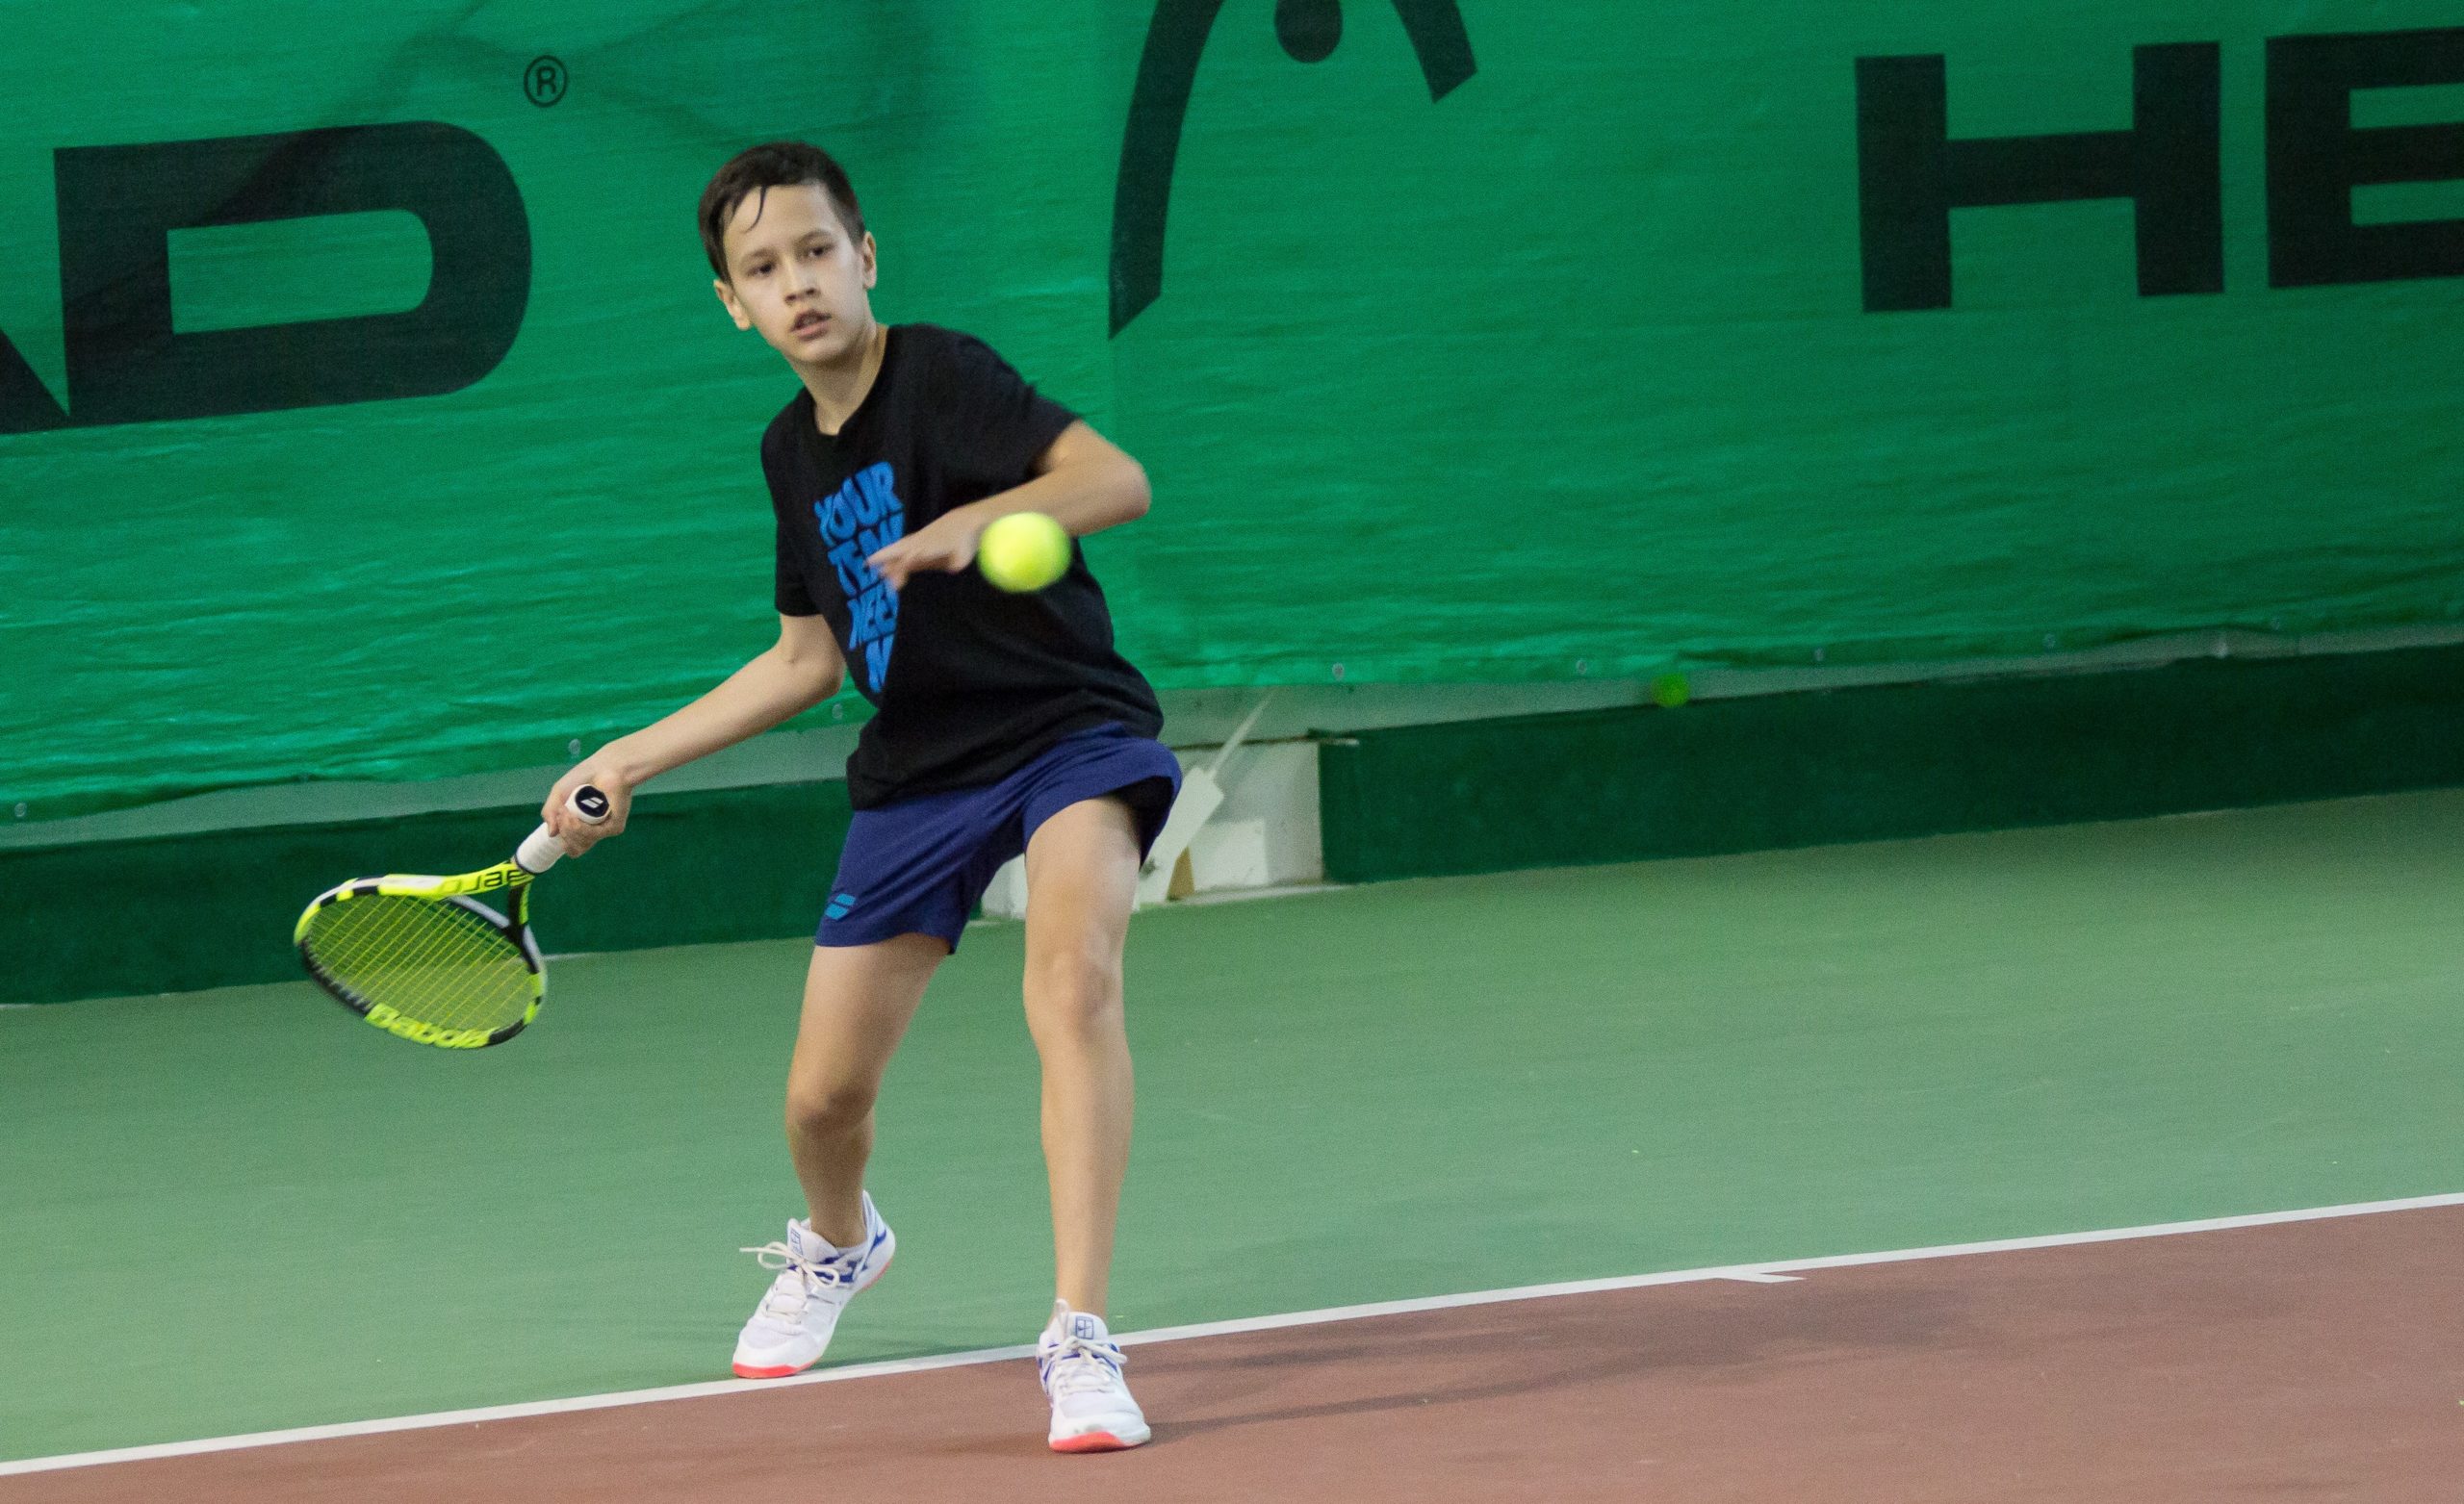 All-Russian Tennis Tournament held with support from Gazprom Transgaz Ufa